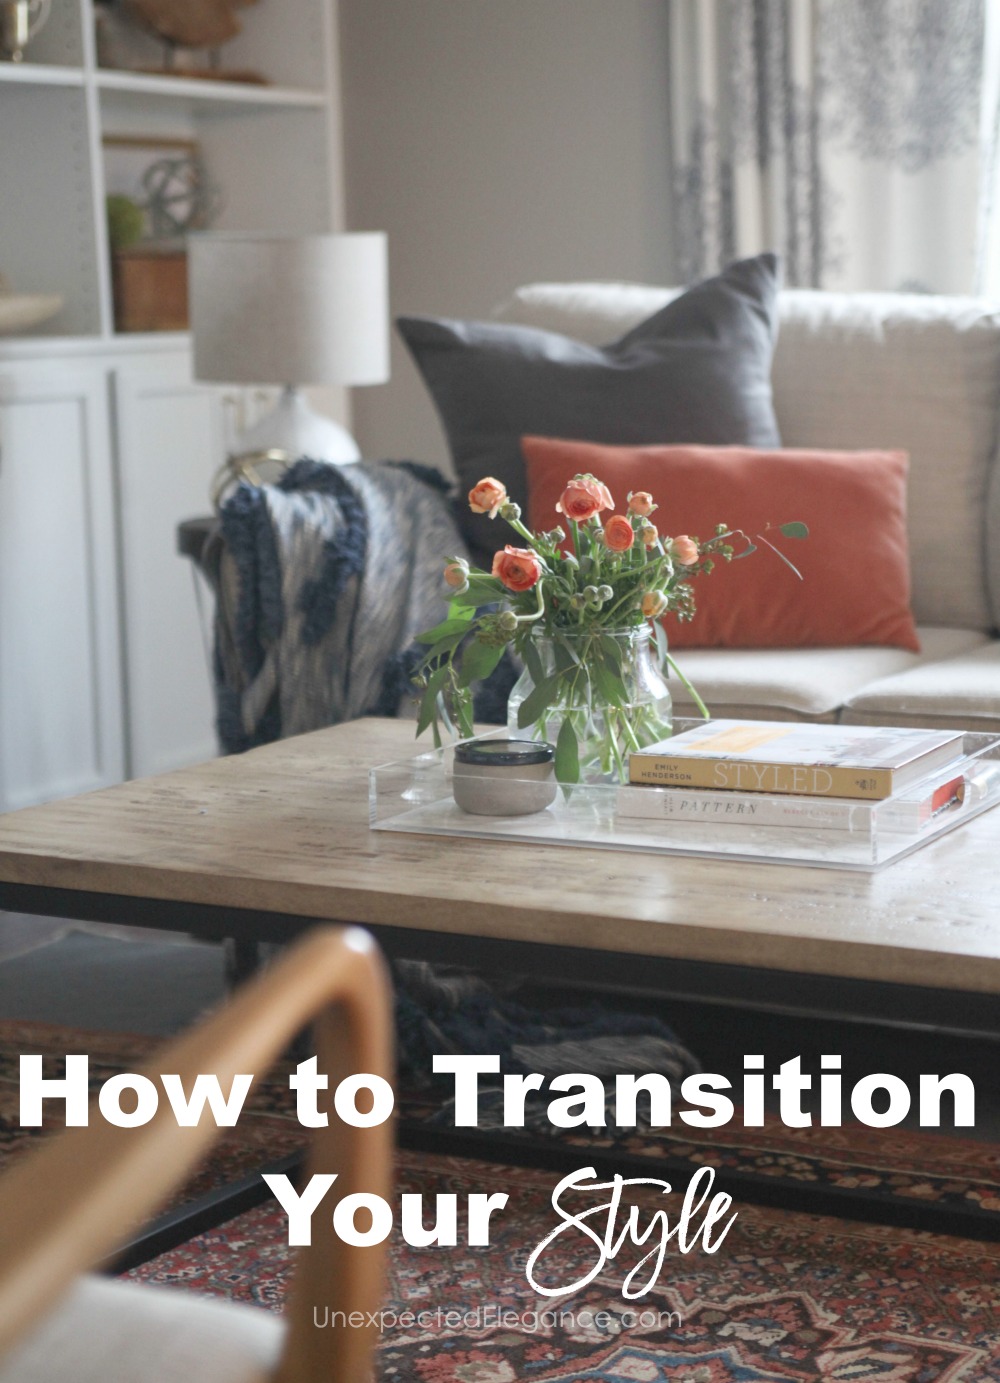 Get some tips and tricks for how to transition your style when your taste has changed. Practical ways to spend less and get the look you want.